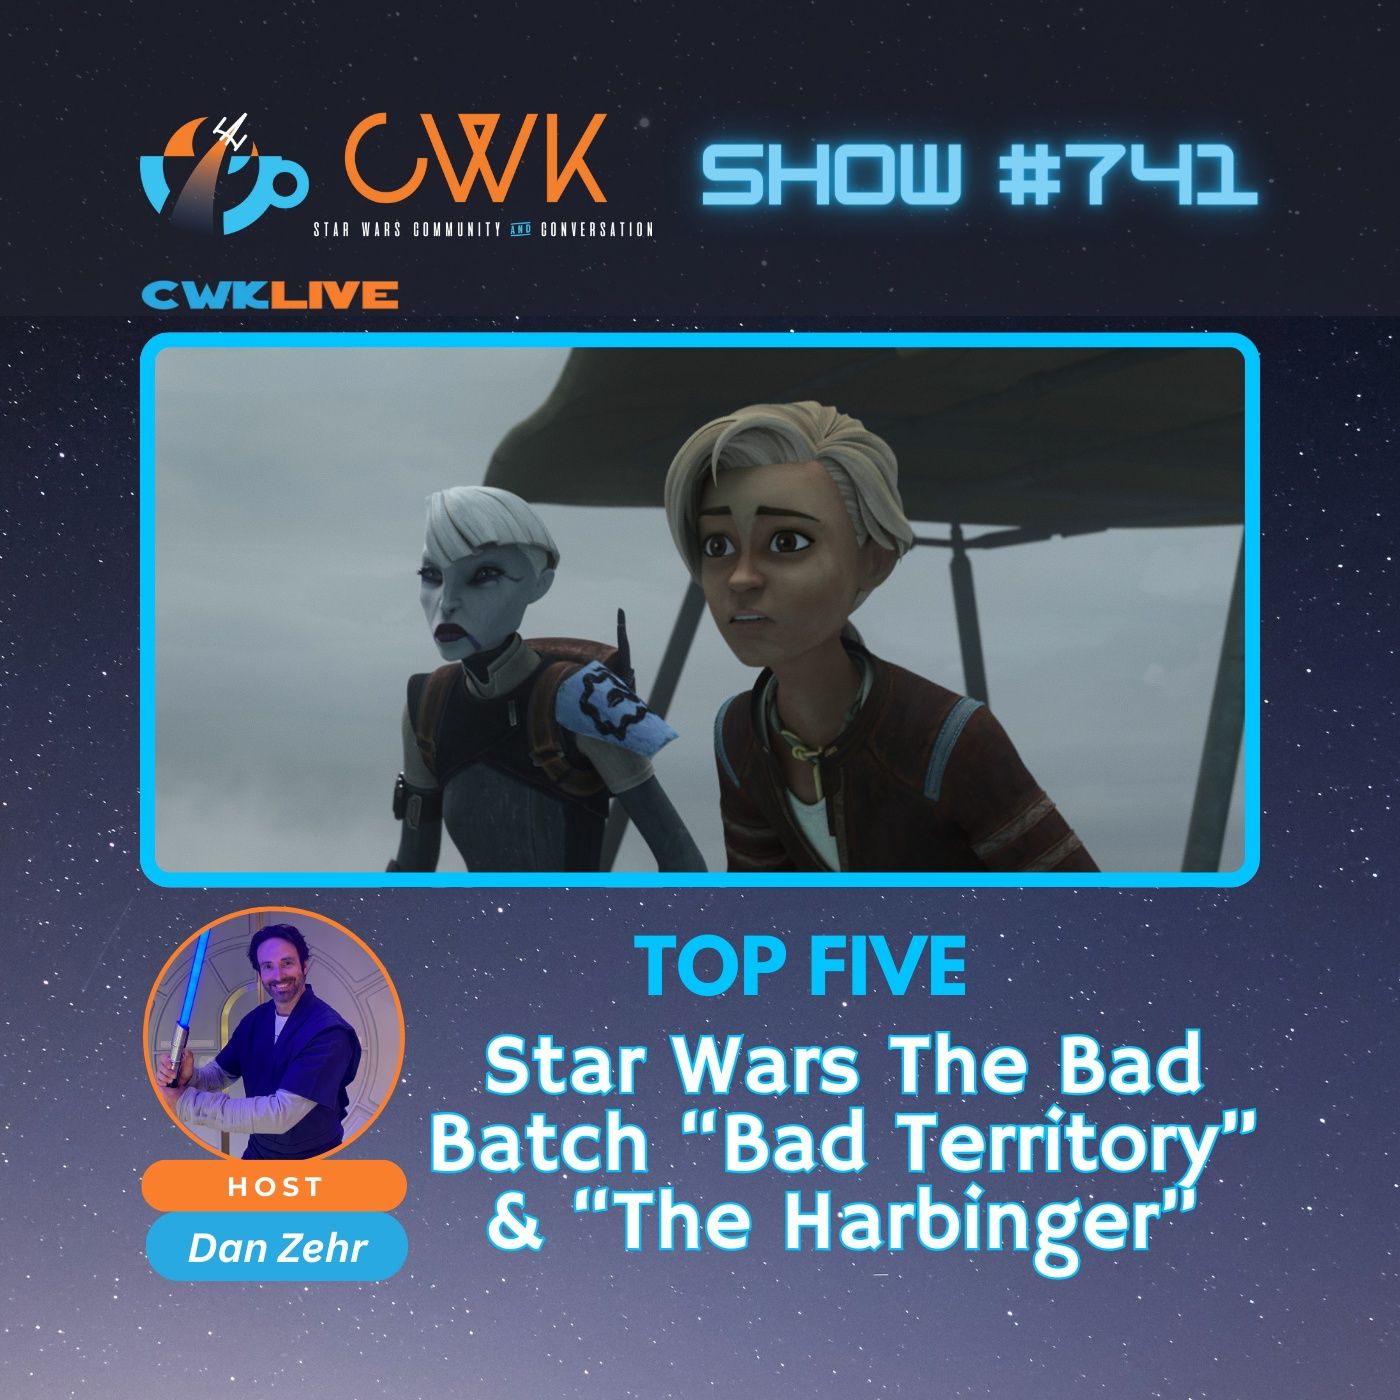 CWK Show #741 LIVE: Top Five Moments from The Bad Batch ”Bad Territory” & ”The Harbinger”